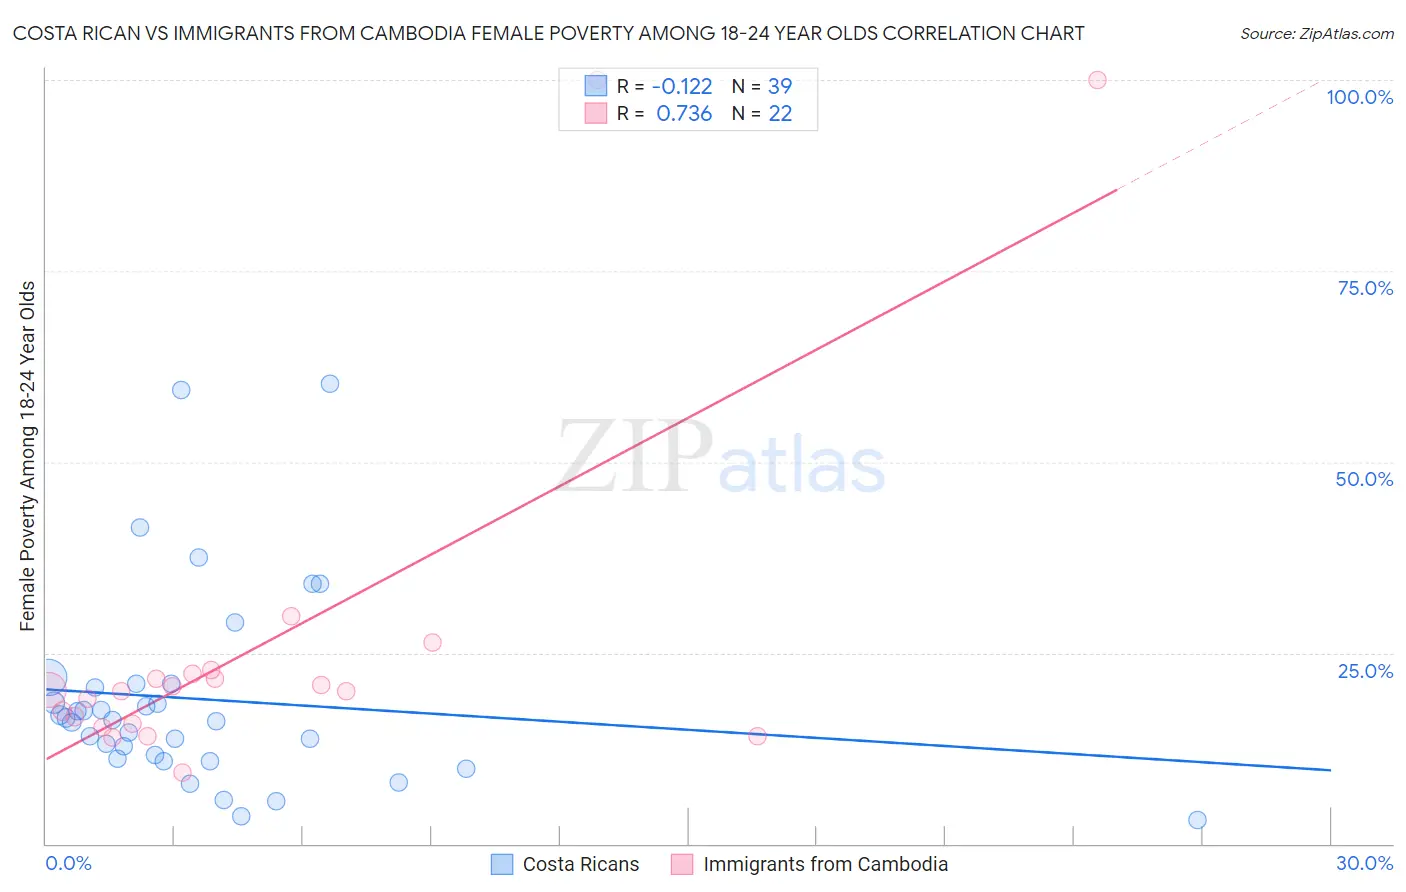 Costa Rican vs Immigrants from Cambodia Female Poverty Among 18-24 Year Olds